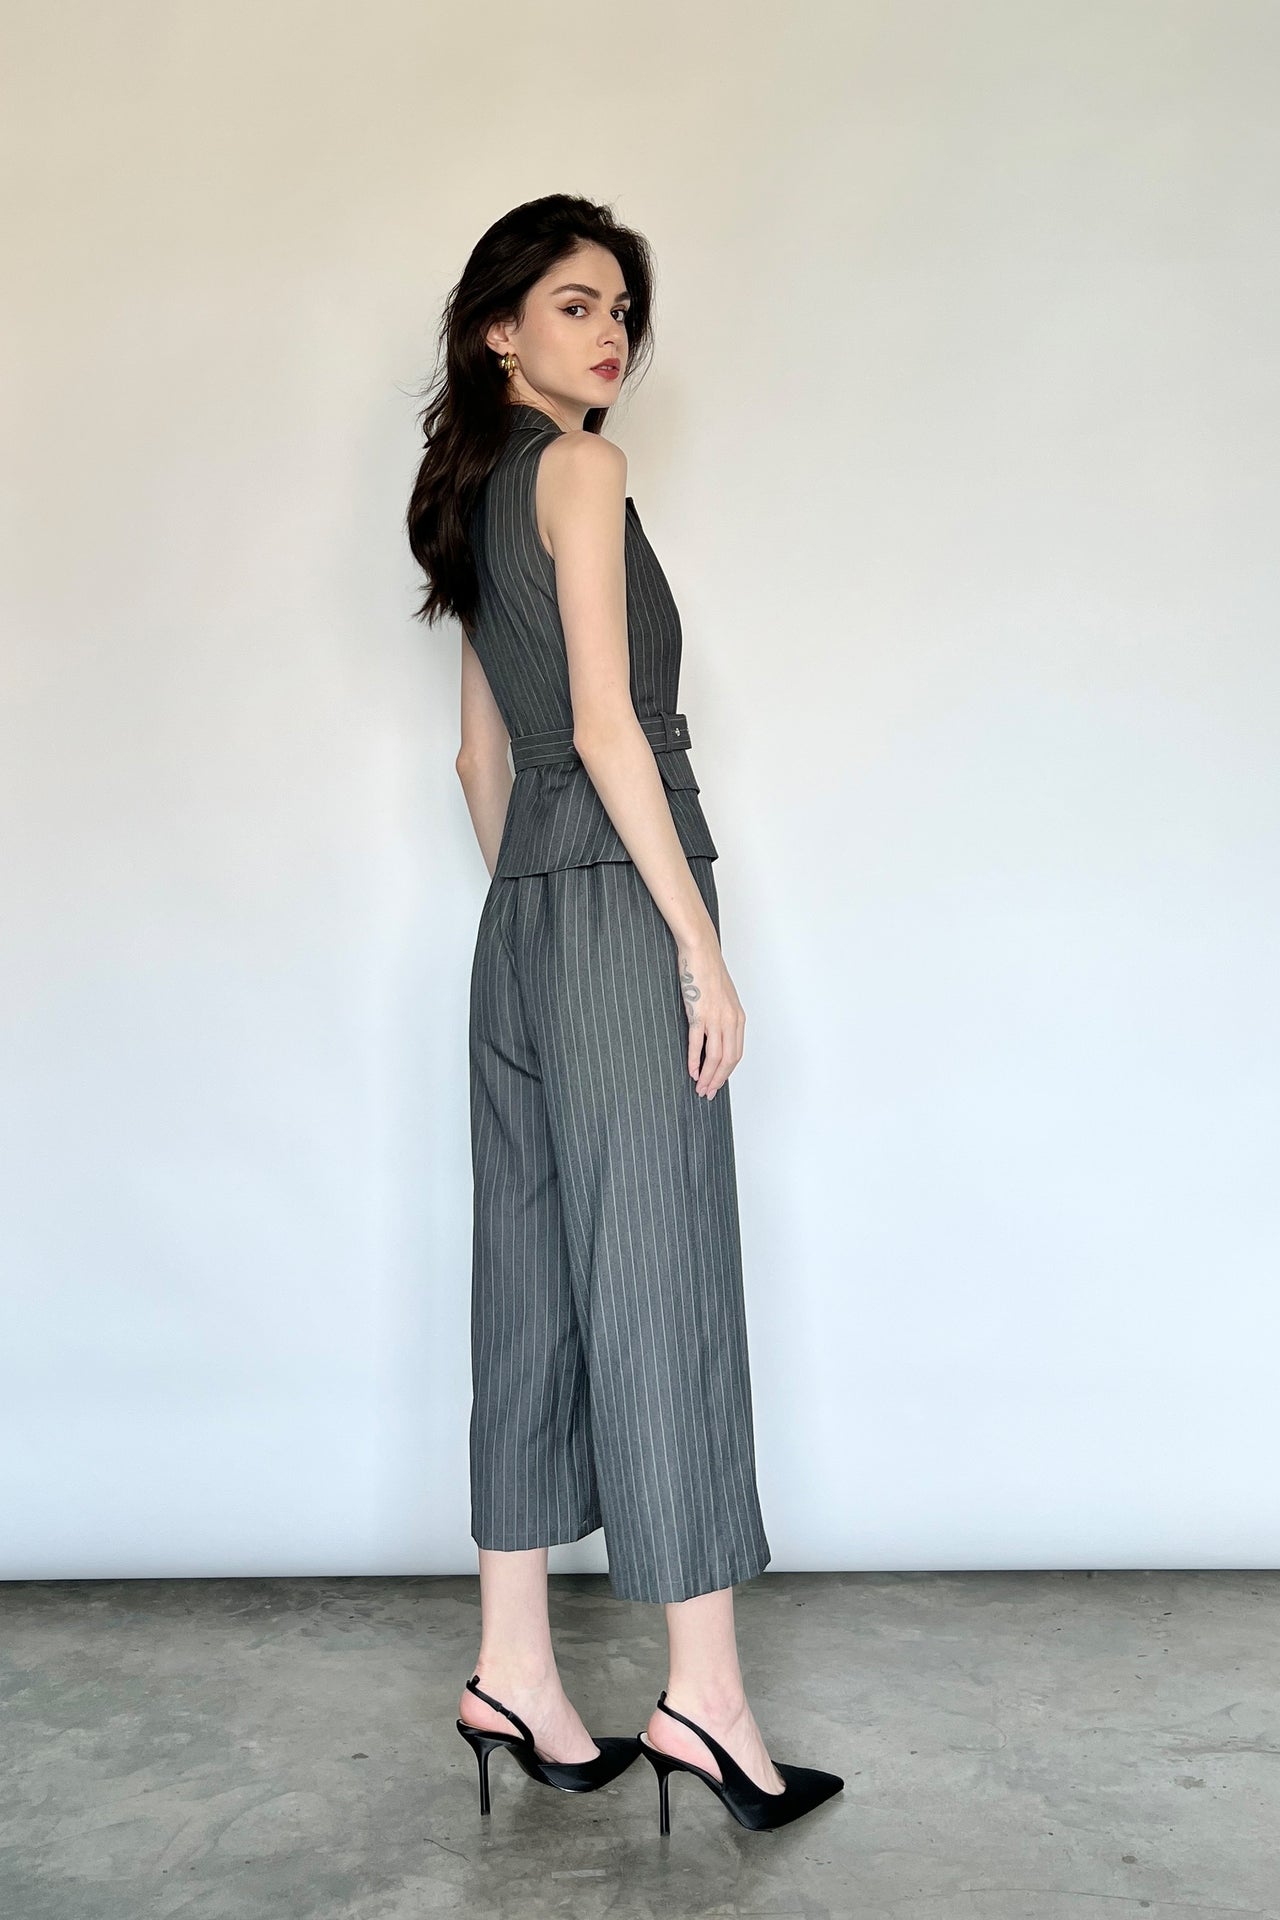 Herald Buckled Jumpsuit in Heather Grey Stripes - Arriving Soon